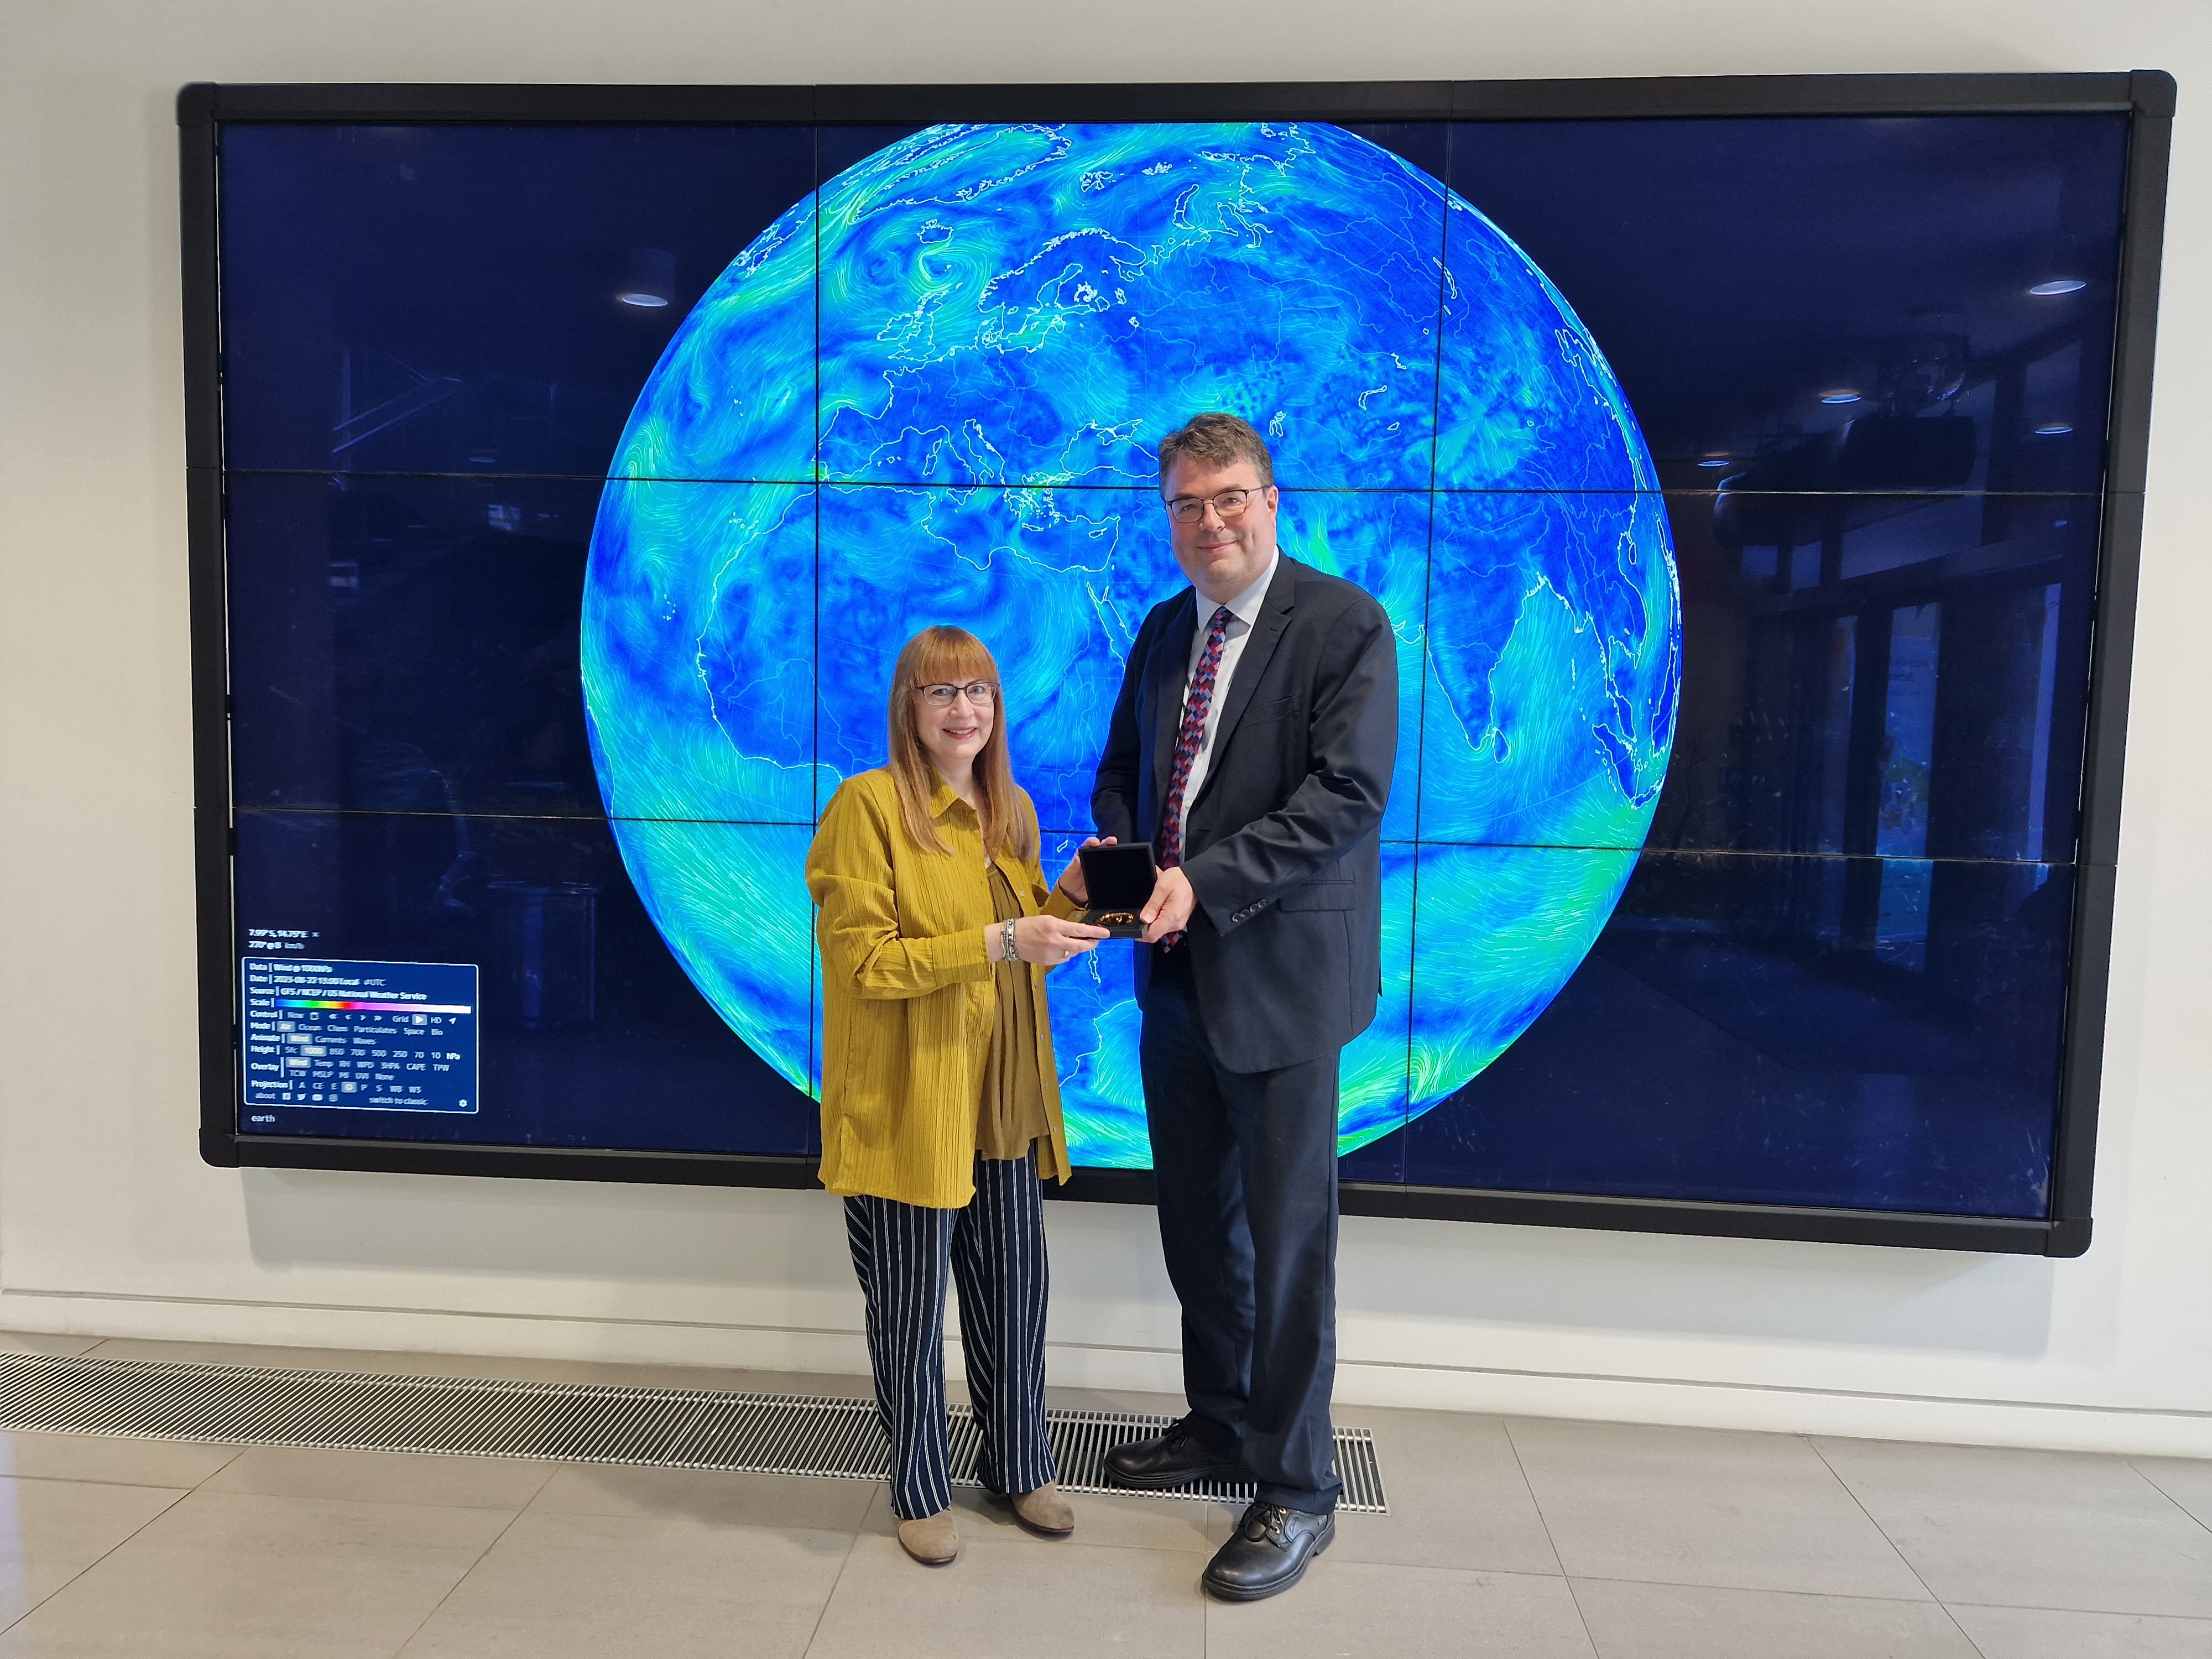 Sharon Ann receiving her medal from Tom Grinyer at IOP London with a live weather map of winds around the world in the background.